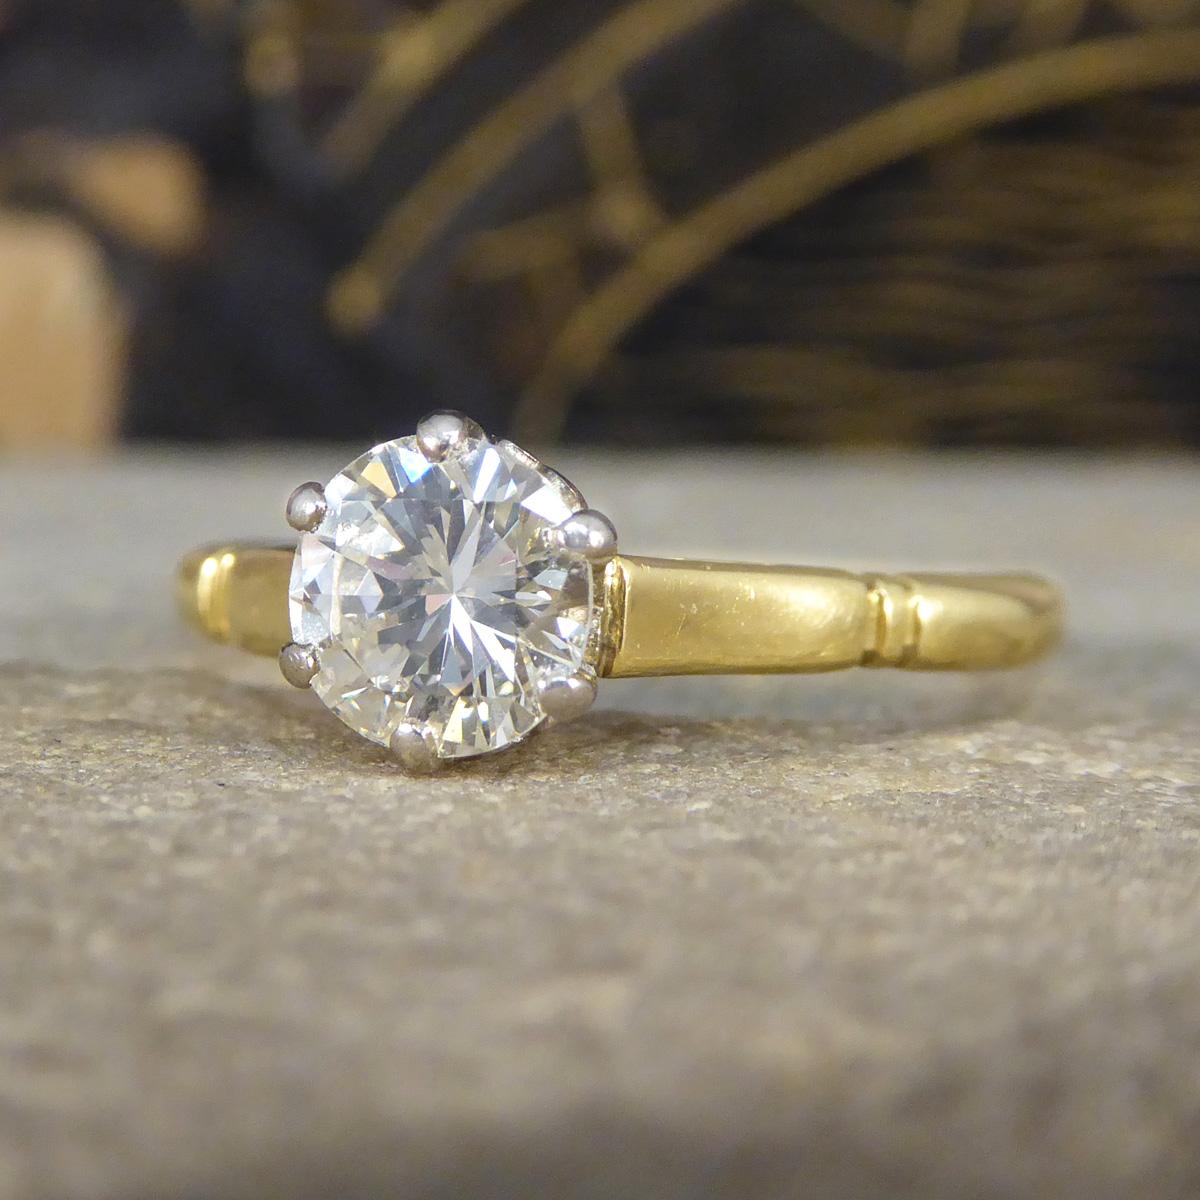 Vintage 0.82ct Diamond Solitaire Ring in 18ct Yellow Gold In Good Condition For Sale In Yorkshire, West Yorkshire